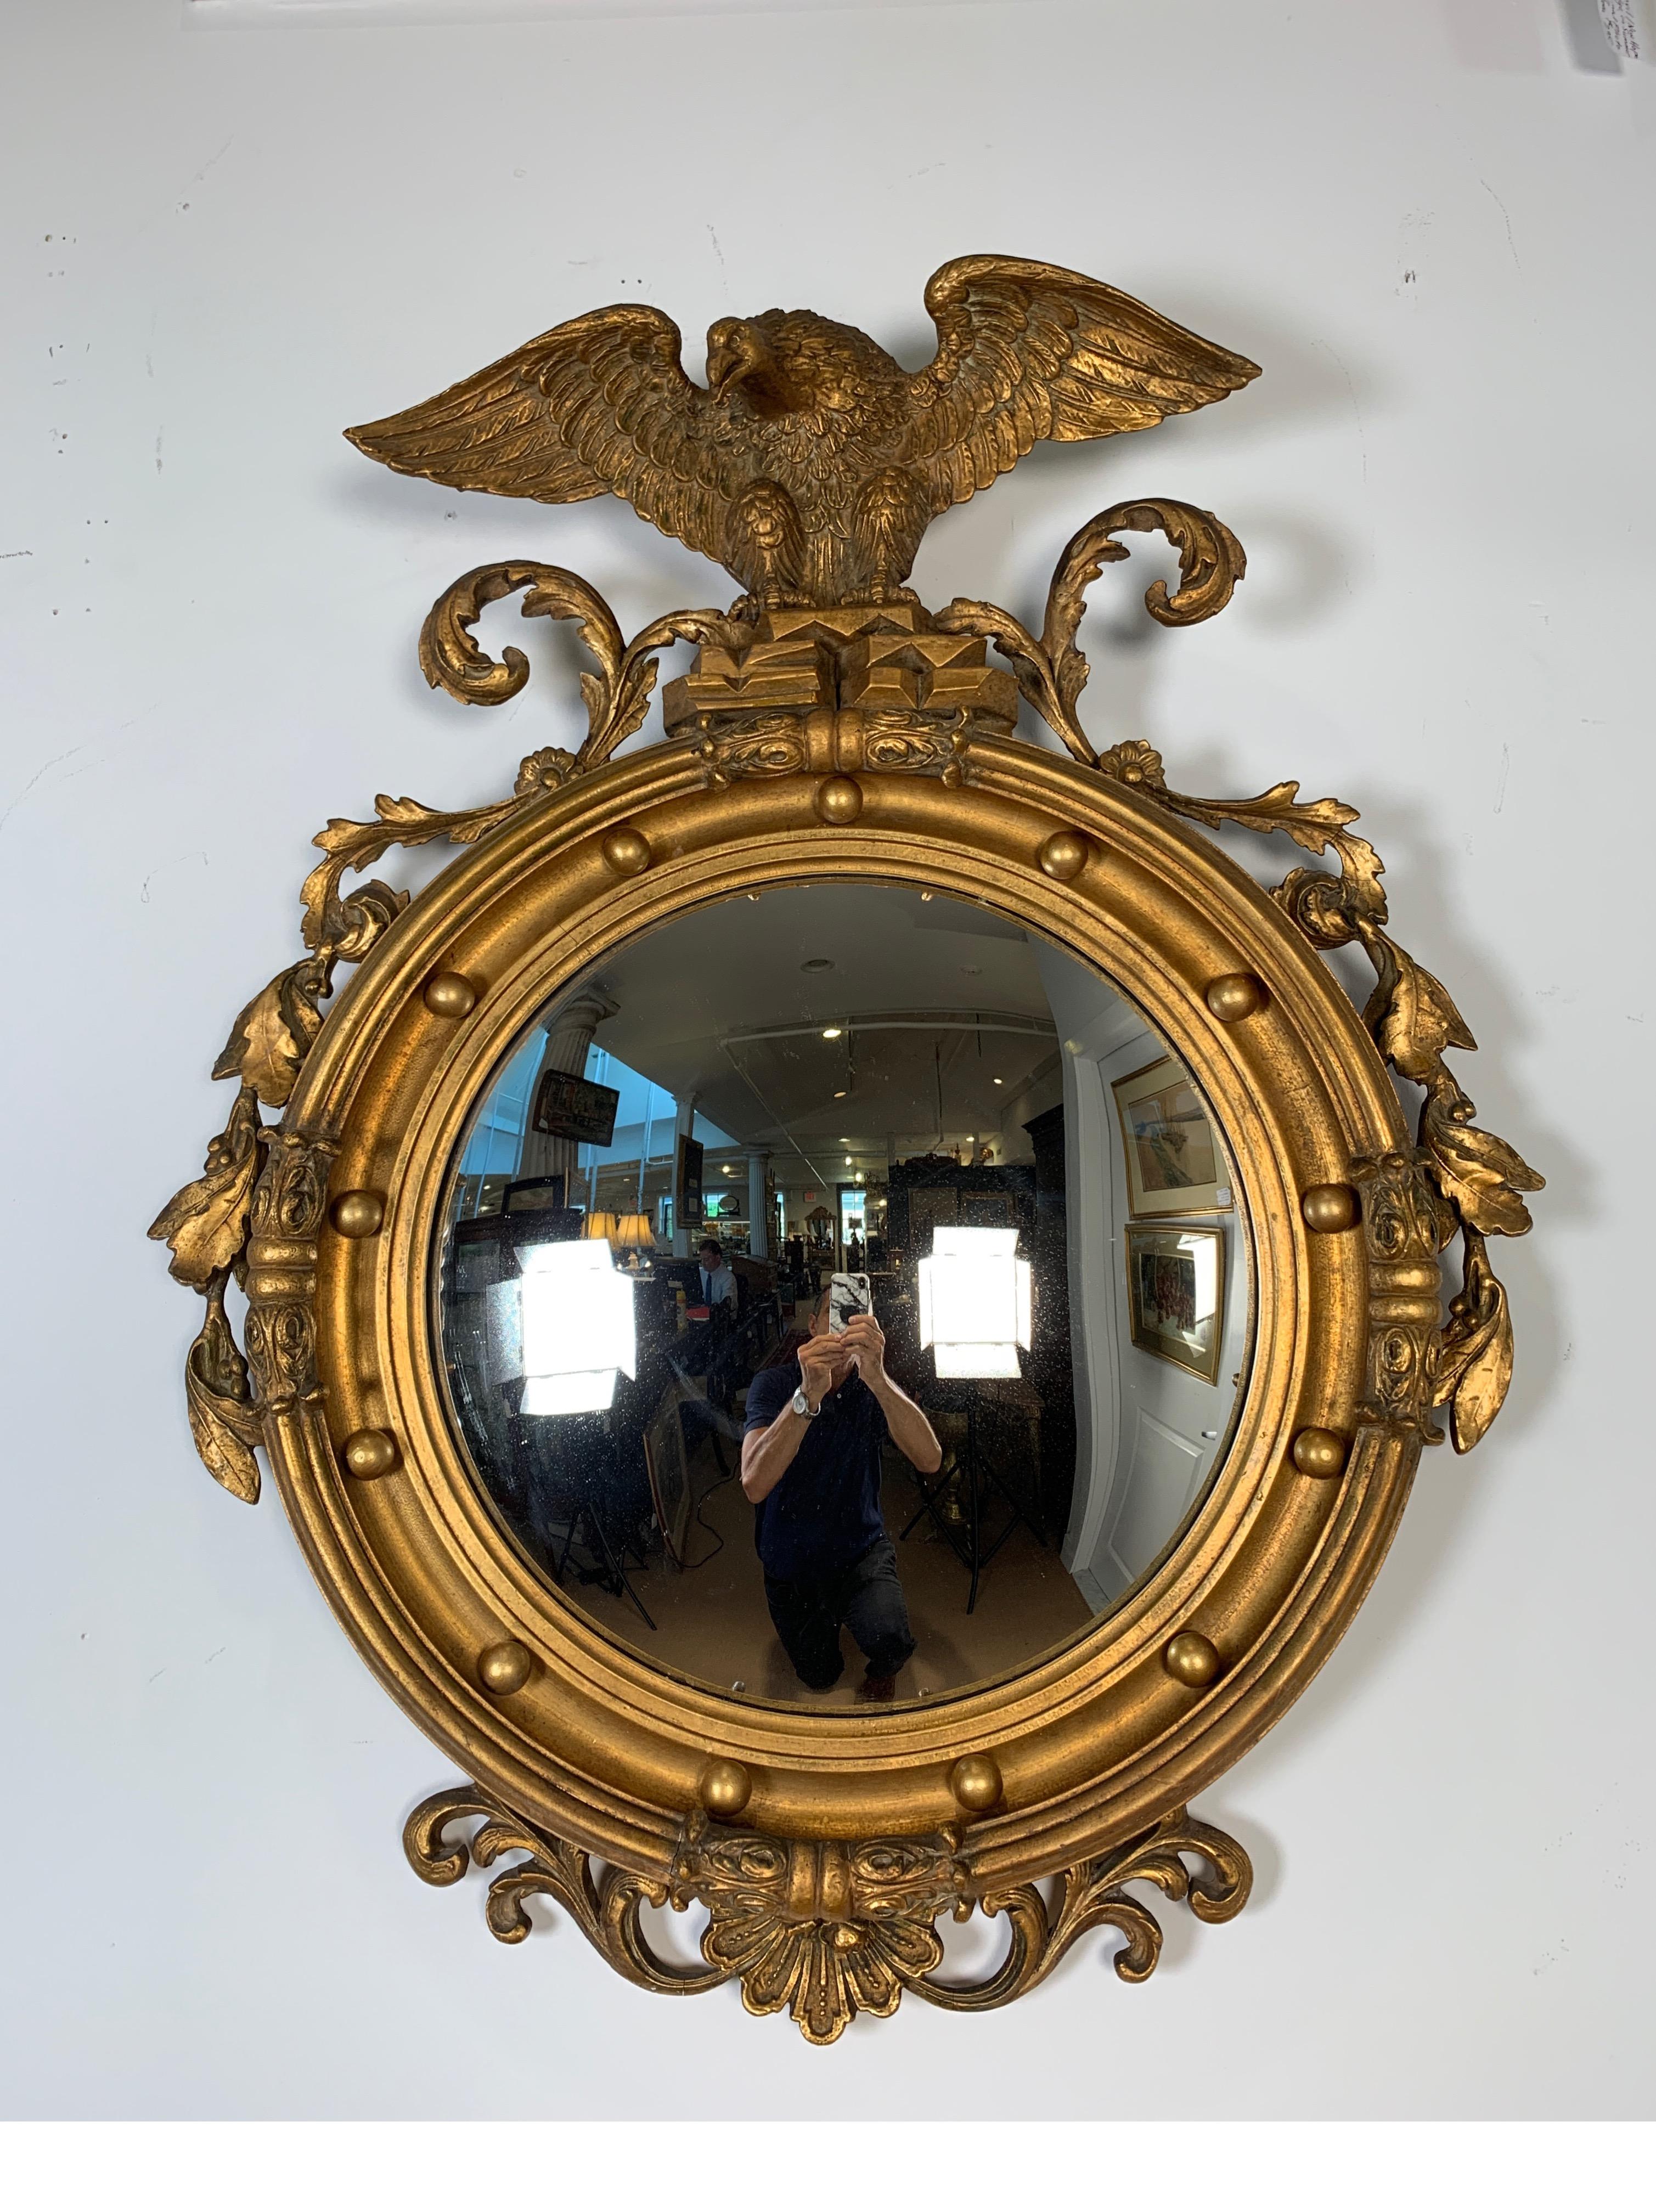 Federal style carved gilt bullseye mirror w/ american eagle on crest, circa 1900.
Nicely carved and gesso gilt mirror with great details. Great for library, office.
Dimensions: 36